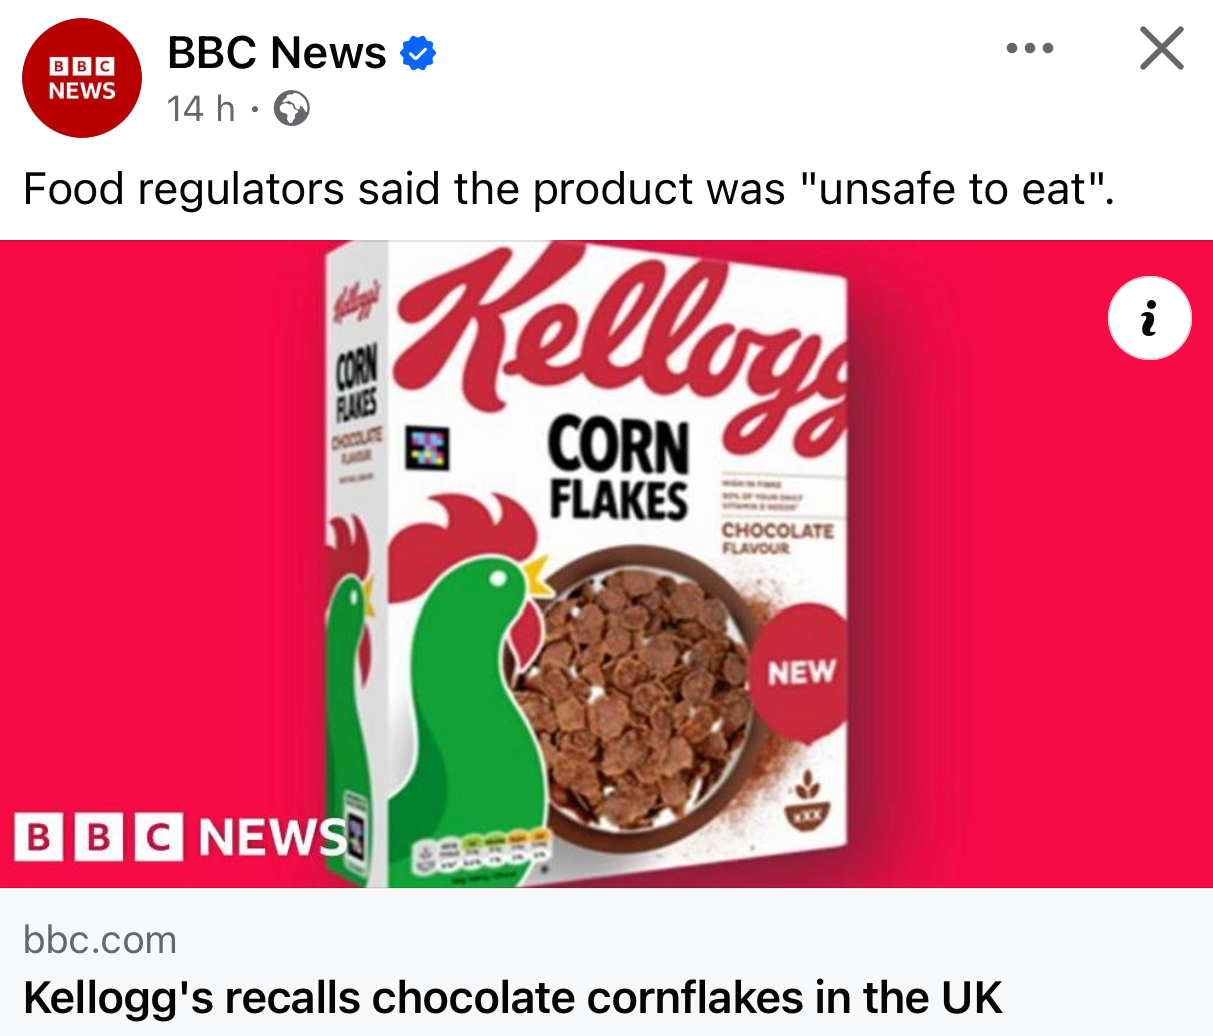 Kellogg's is recalling its boxes of Chocolate Cornflakes following complaints of choking hazards due to hard lumps in the cereal. The breakfast bra...